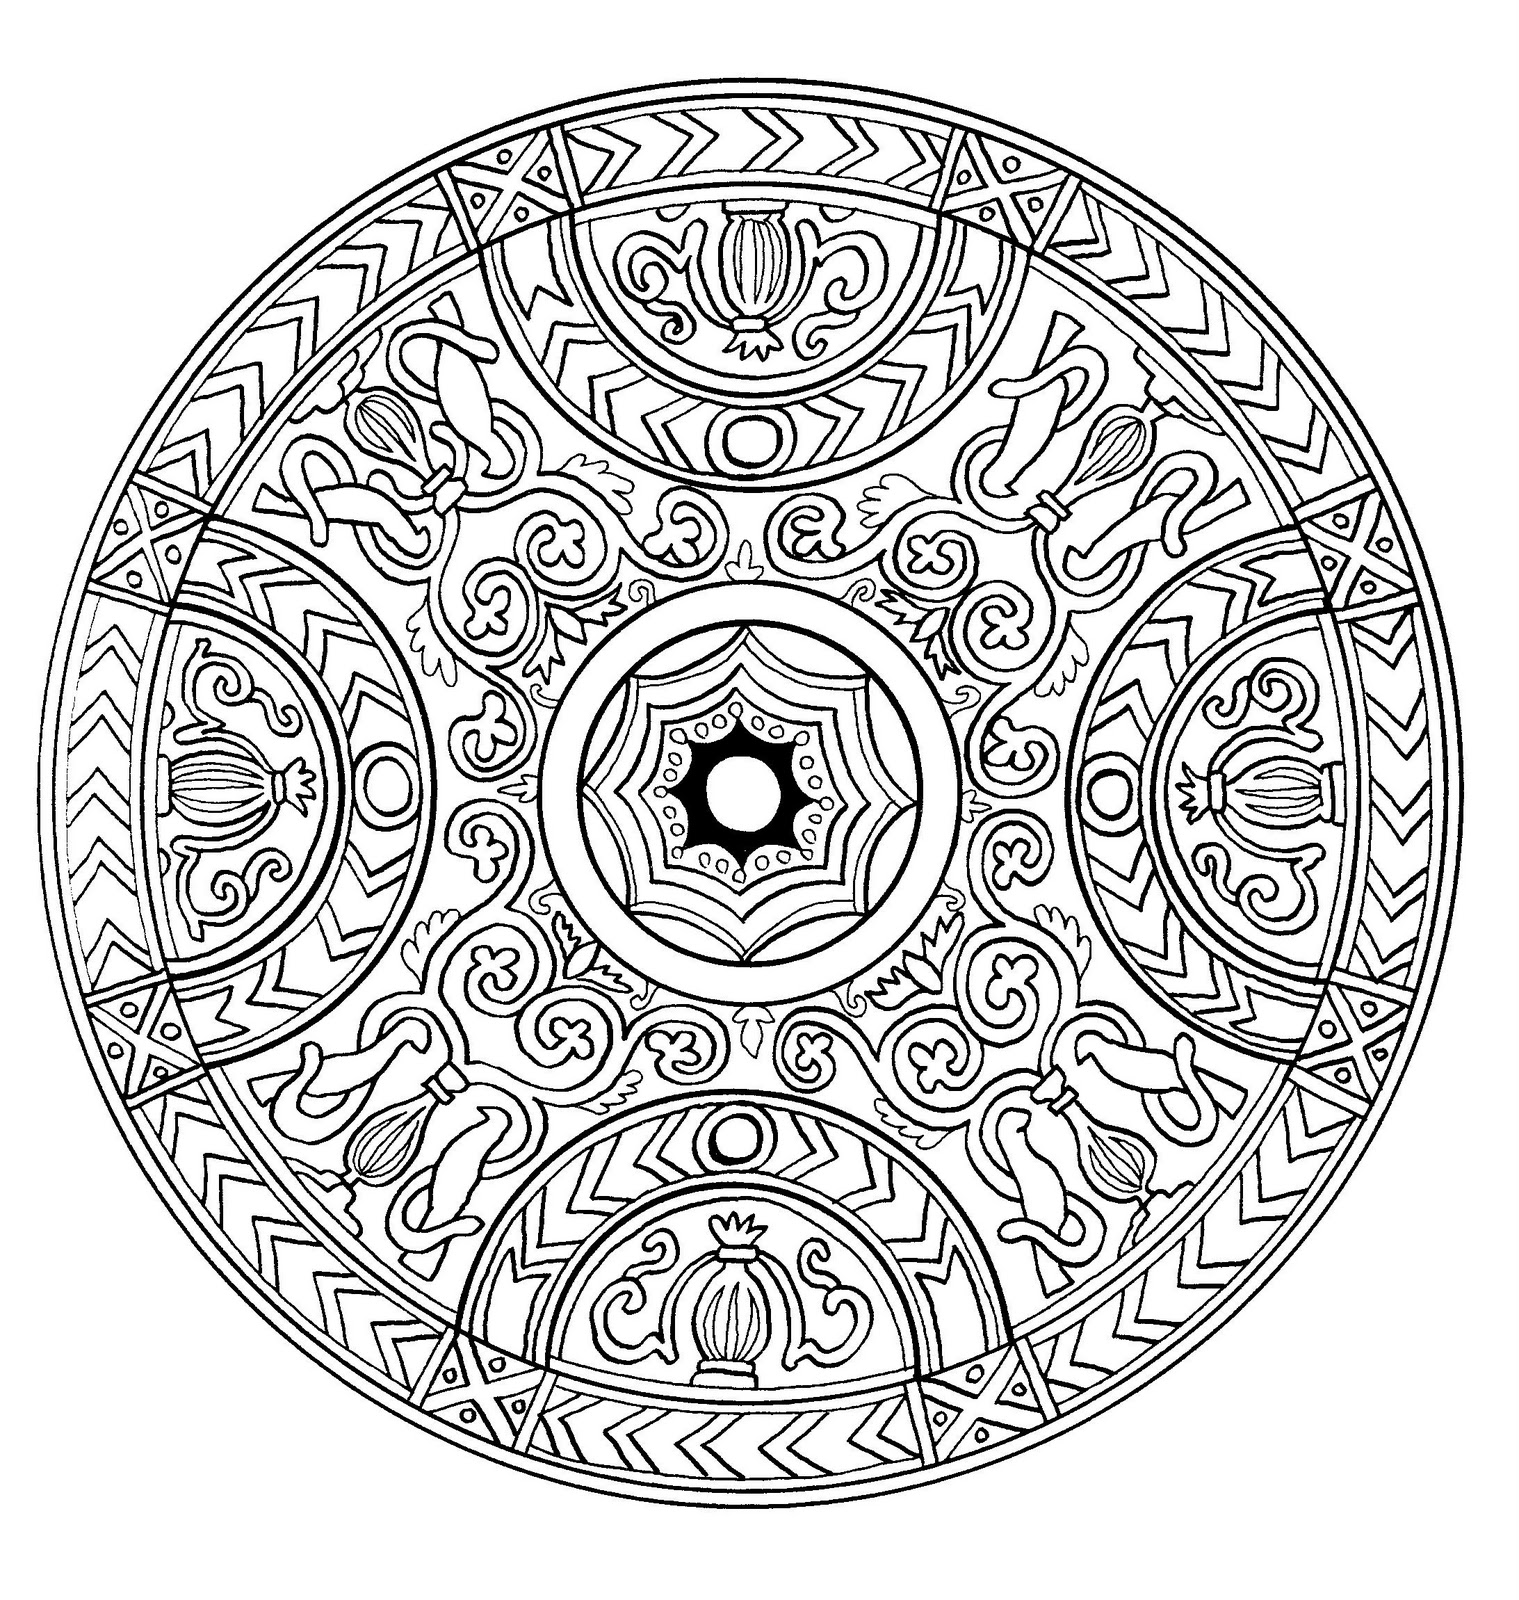 Mandala drawing with an old style, making think of kings & queens